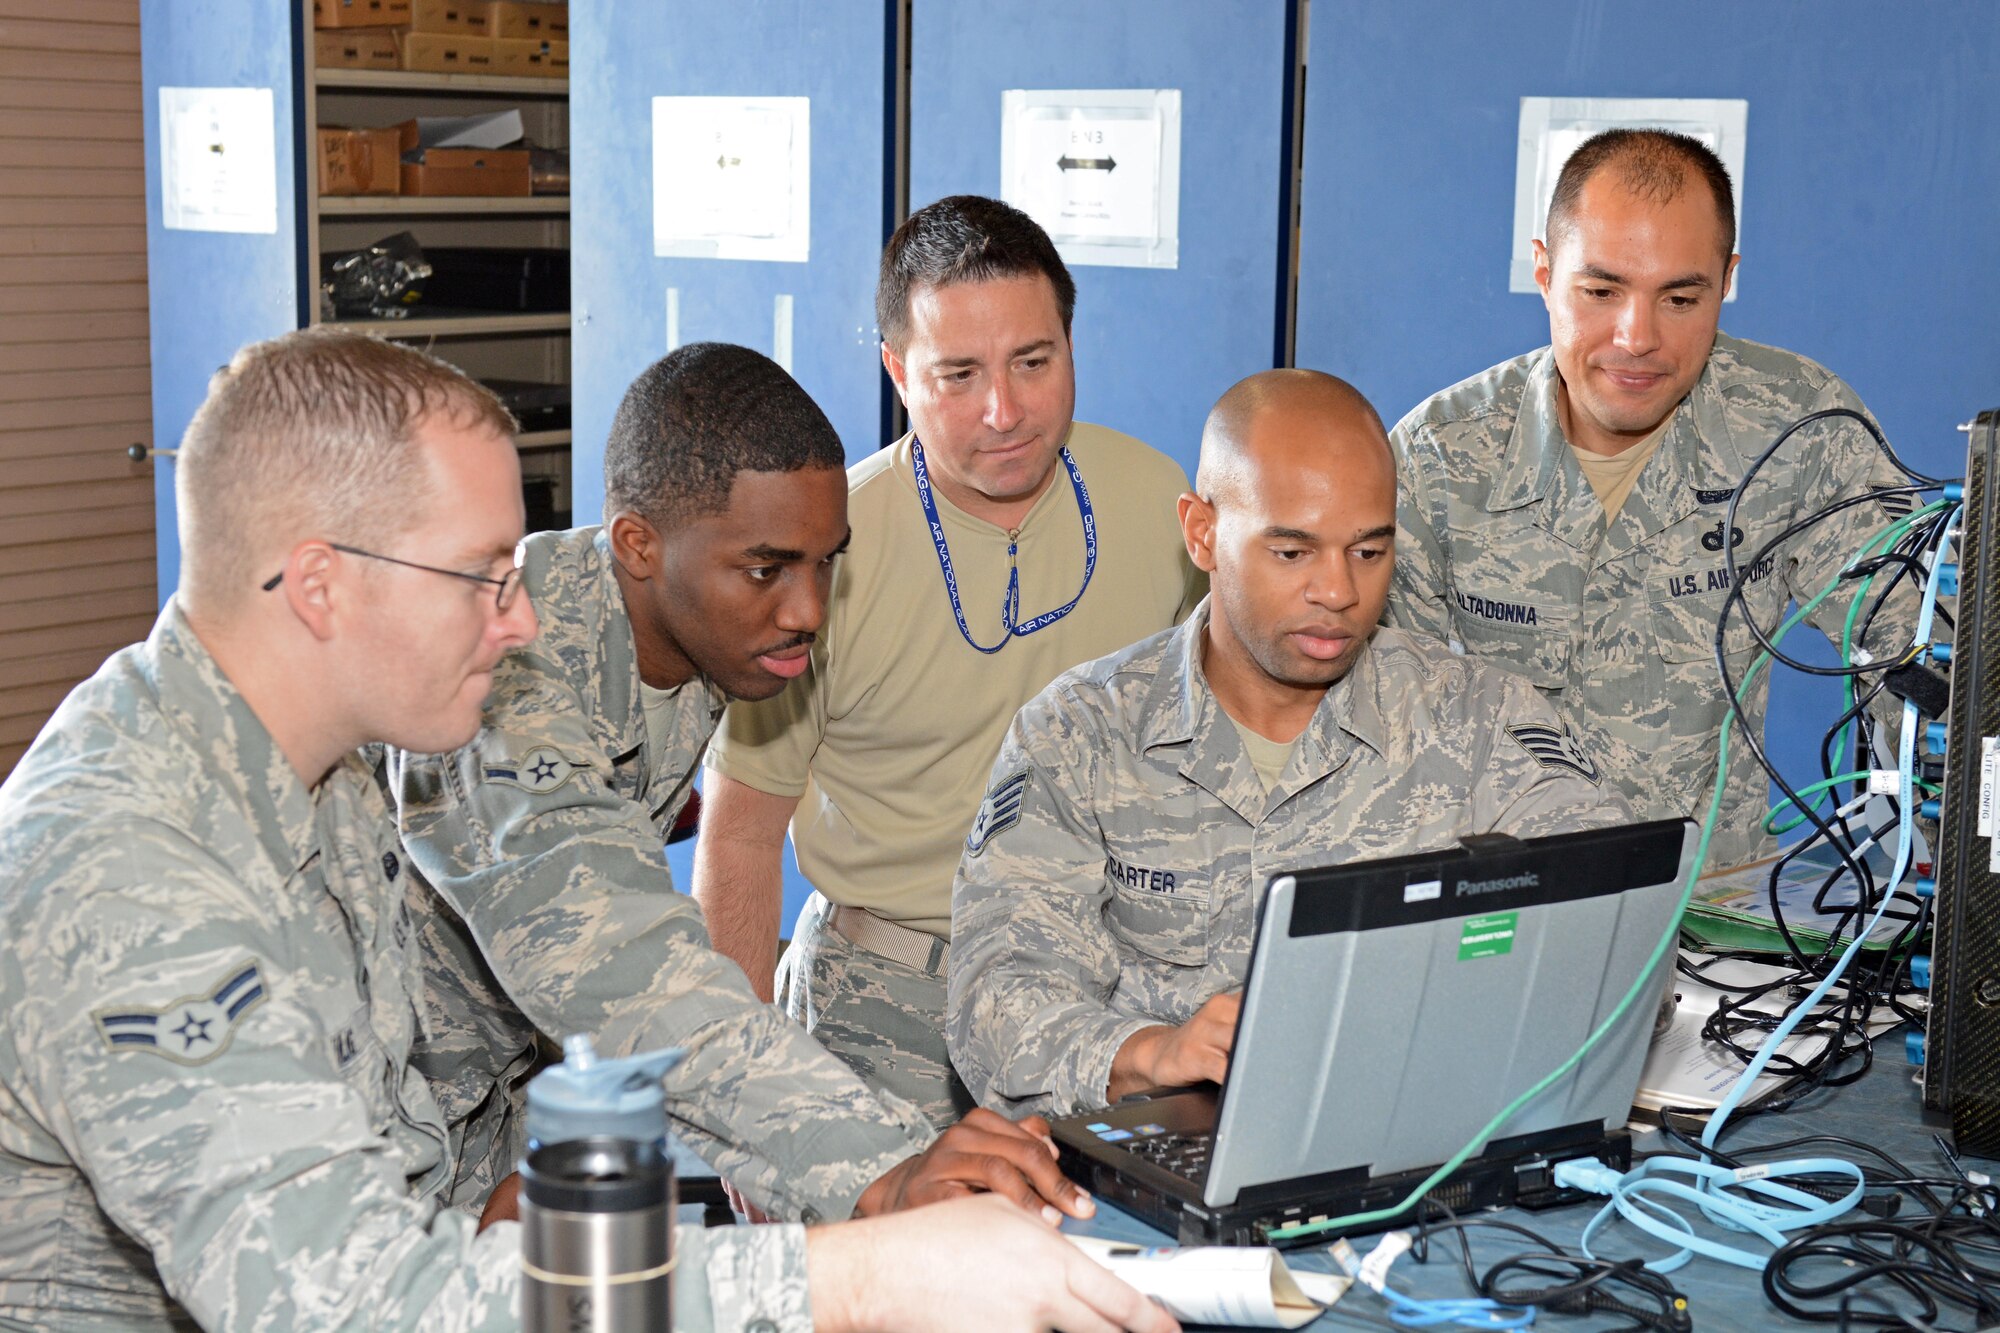 U.S. Air Force Staff Sgt. Darius Carter and Airman Tyler Kulig with the help from others in the 290th Joint Communications Support Squadron "B-Flight" troubleshoot the setup and configuration of a JBlox baseband equipment at MacDill Air Force Base, Tampa Florida, May 3, 2015. The JBlox baseband equipment is used to connect phones and computers to satellite systems. (U.S. Air Force photo by SSgt Troy Anderson/Released)